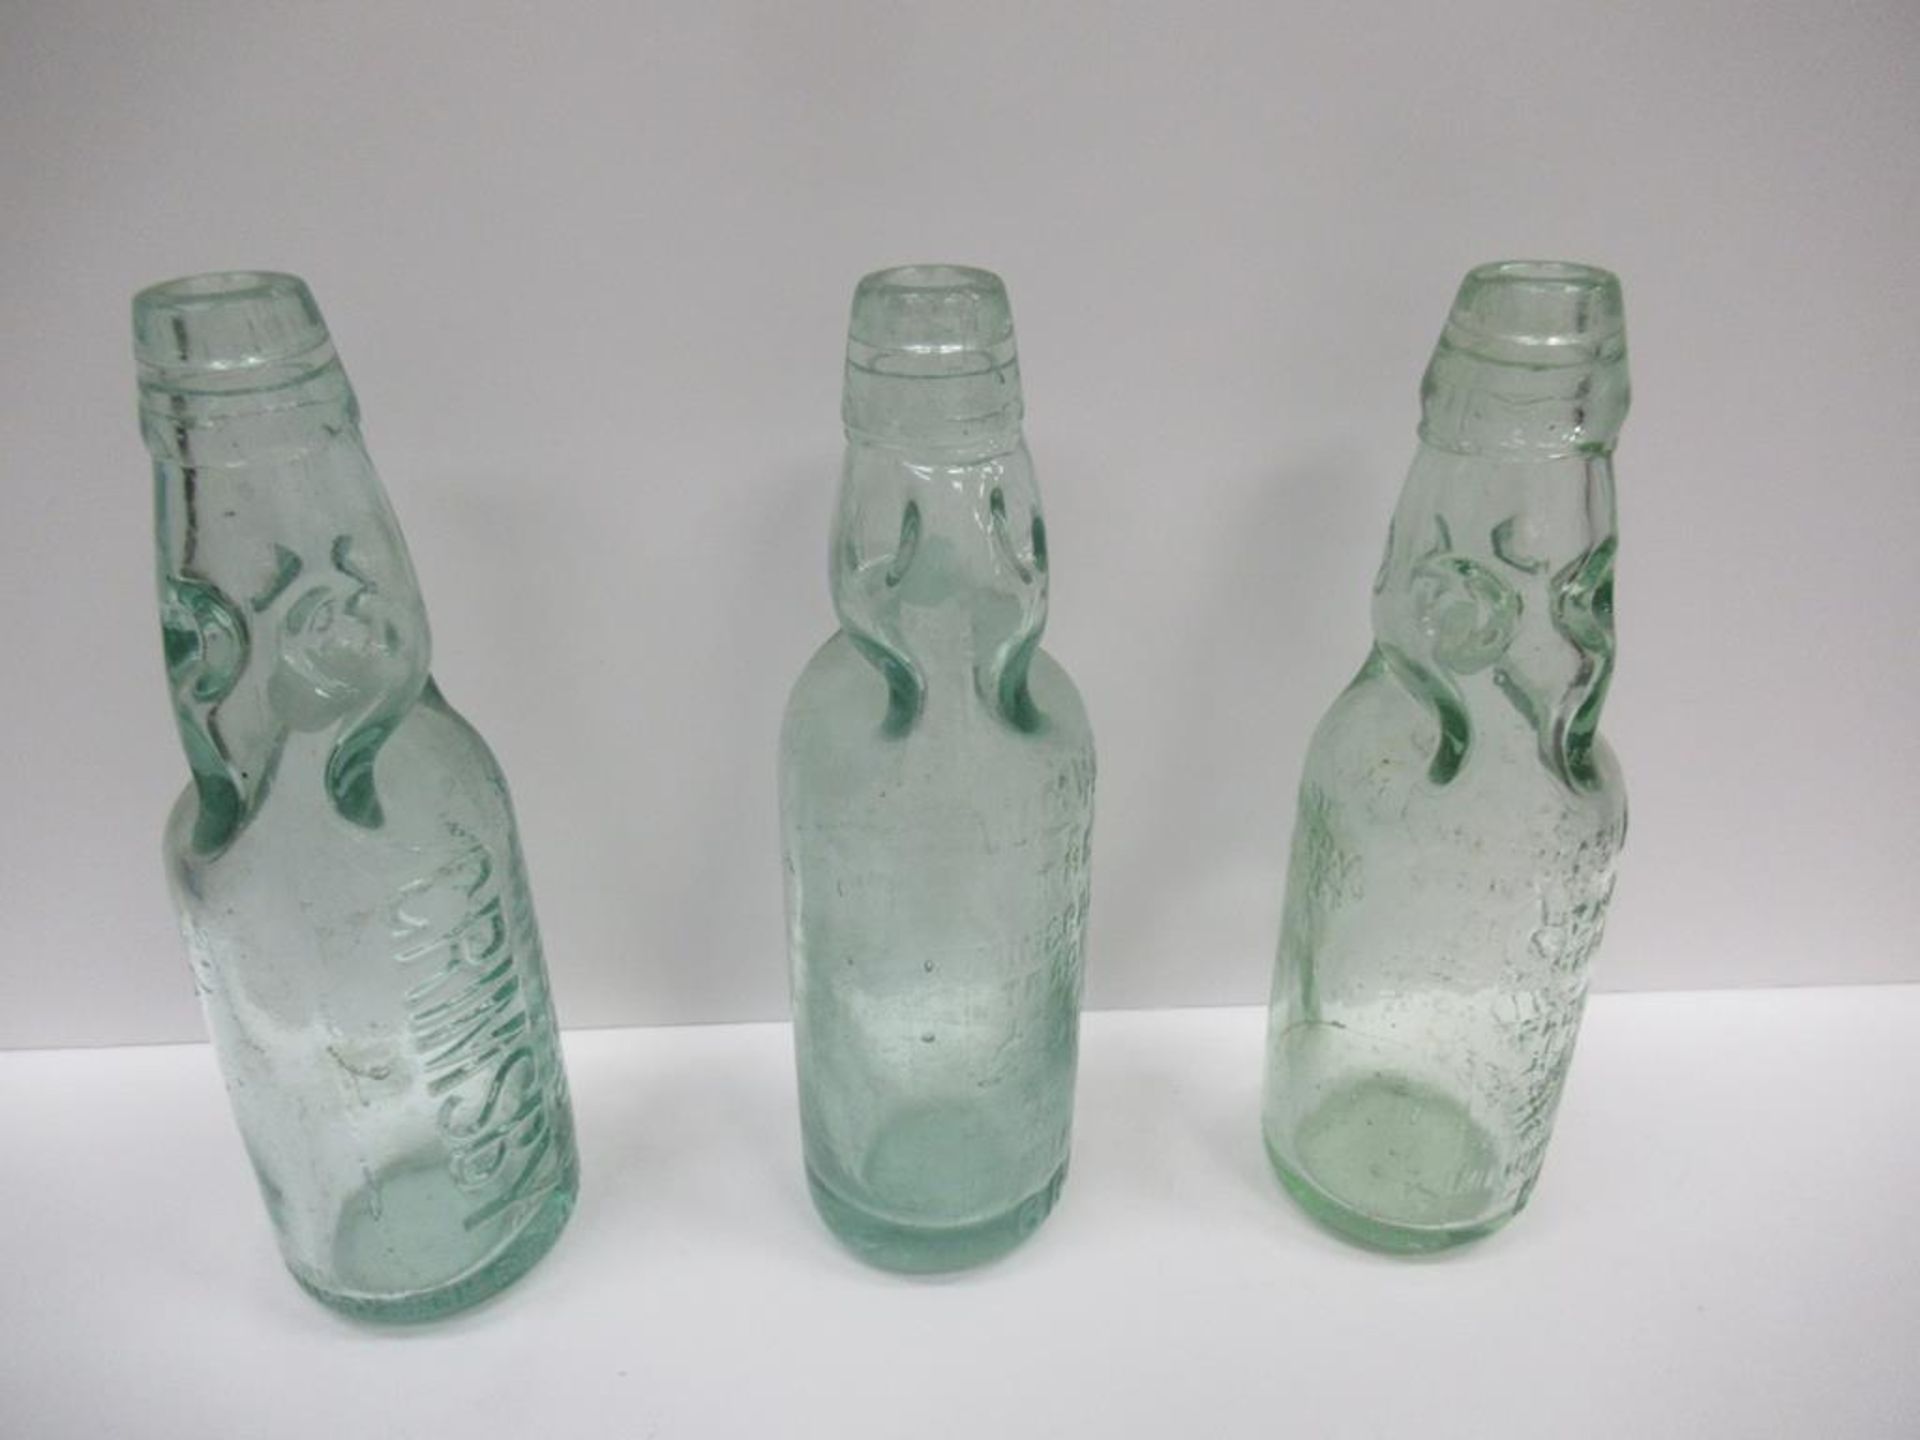 6x Grimsby W.M Hill & Co (4) and W. Hill & Son (2) Codd bottles - Image 13 of 21